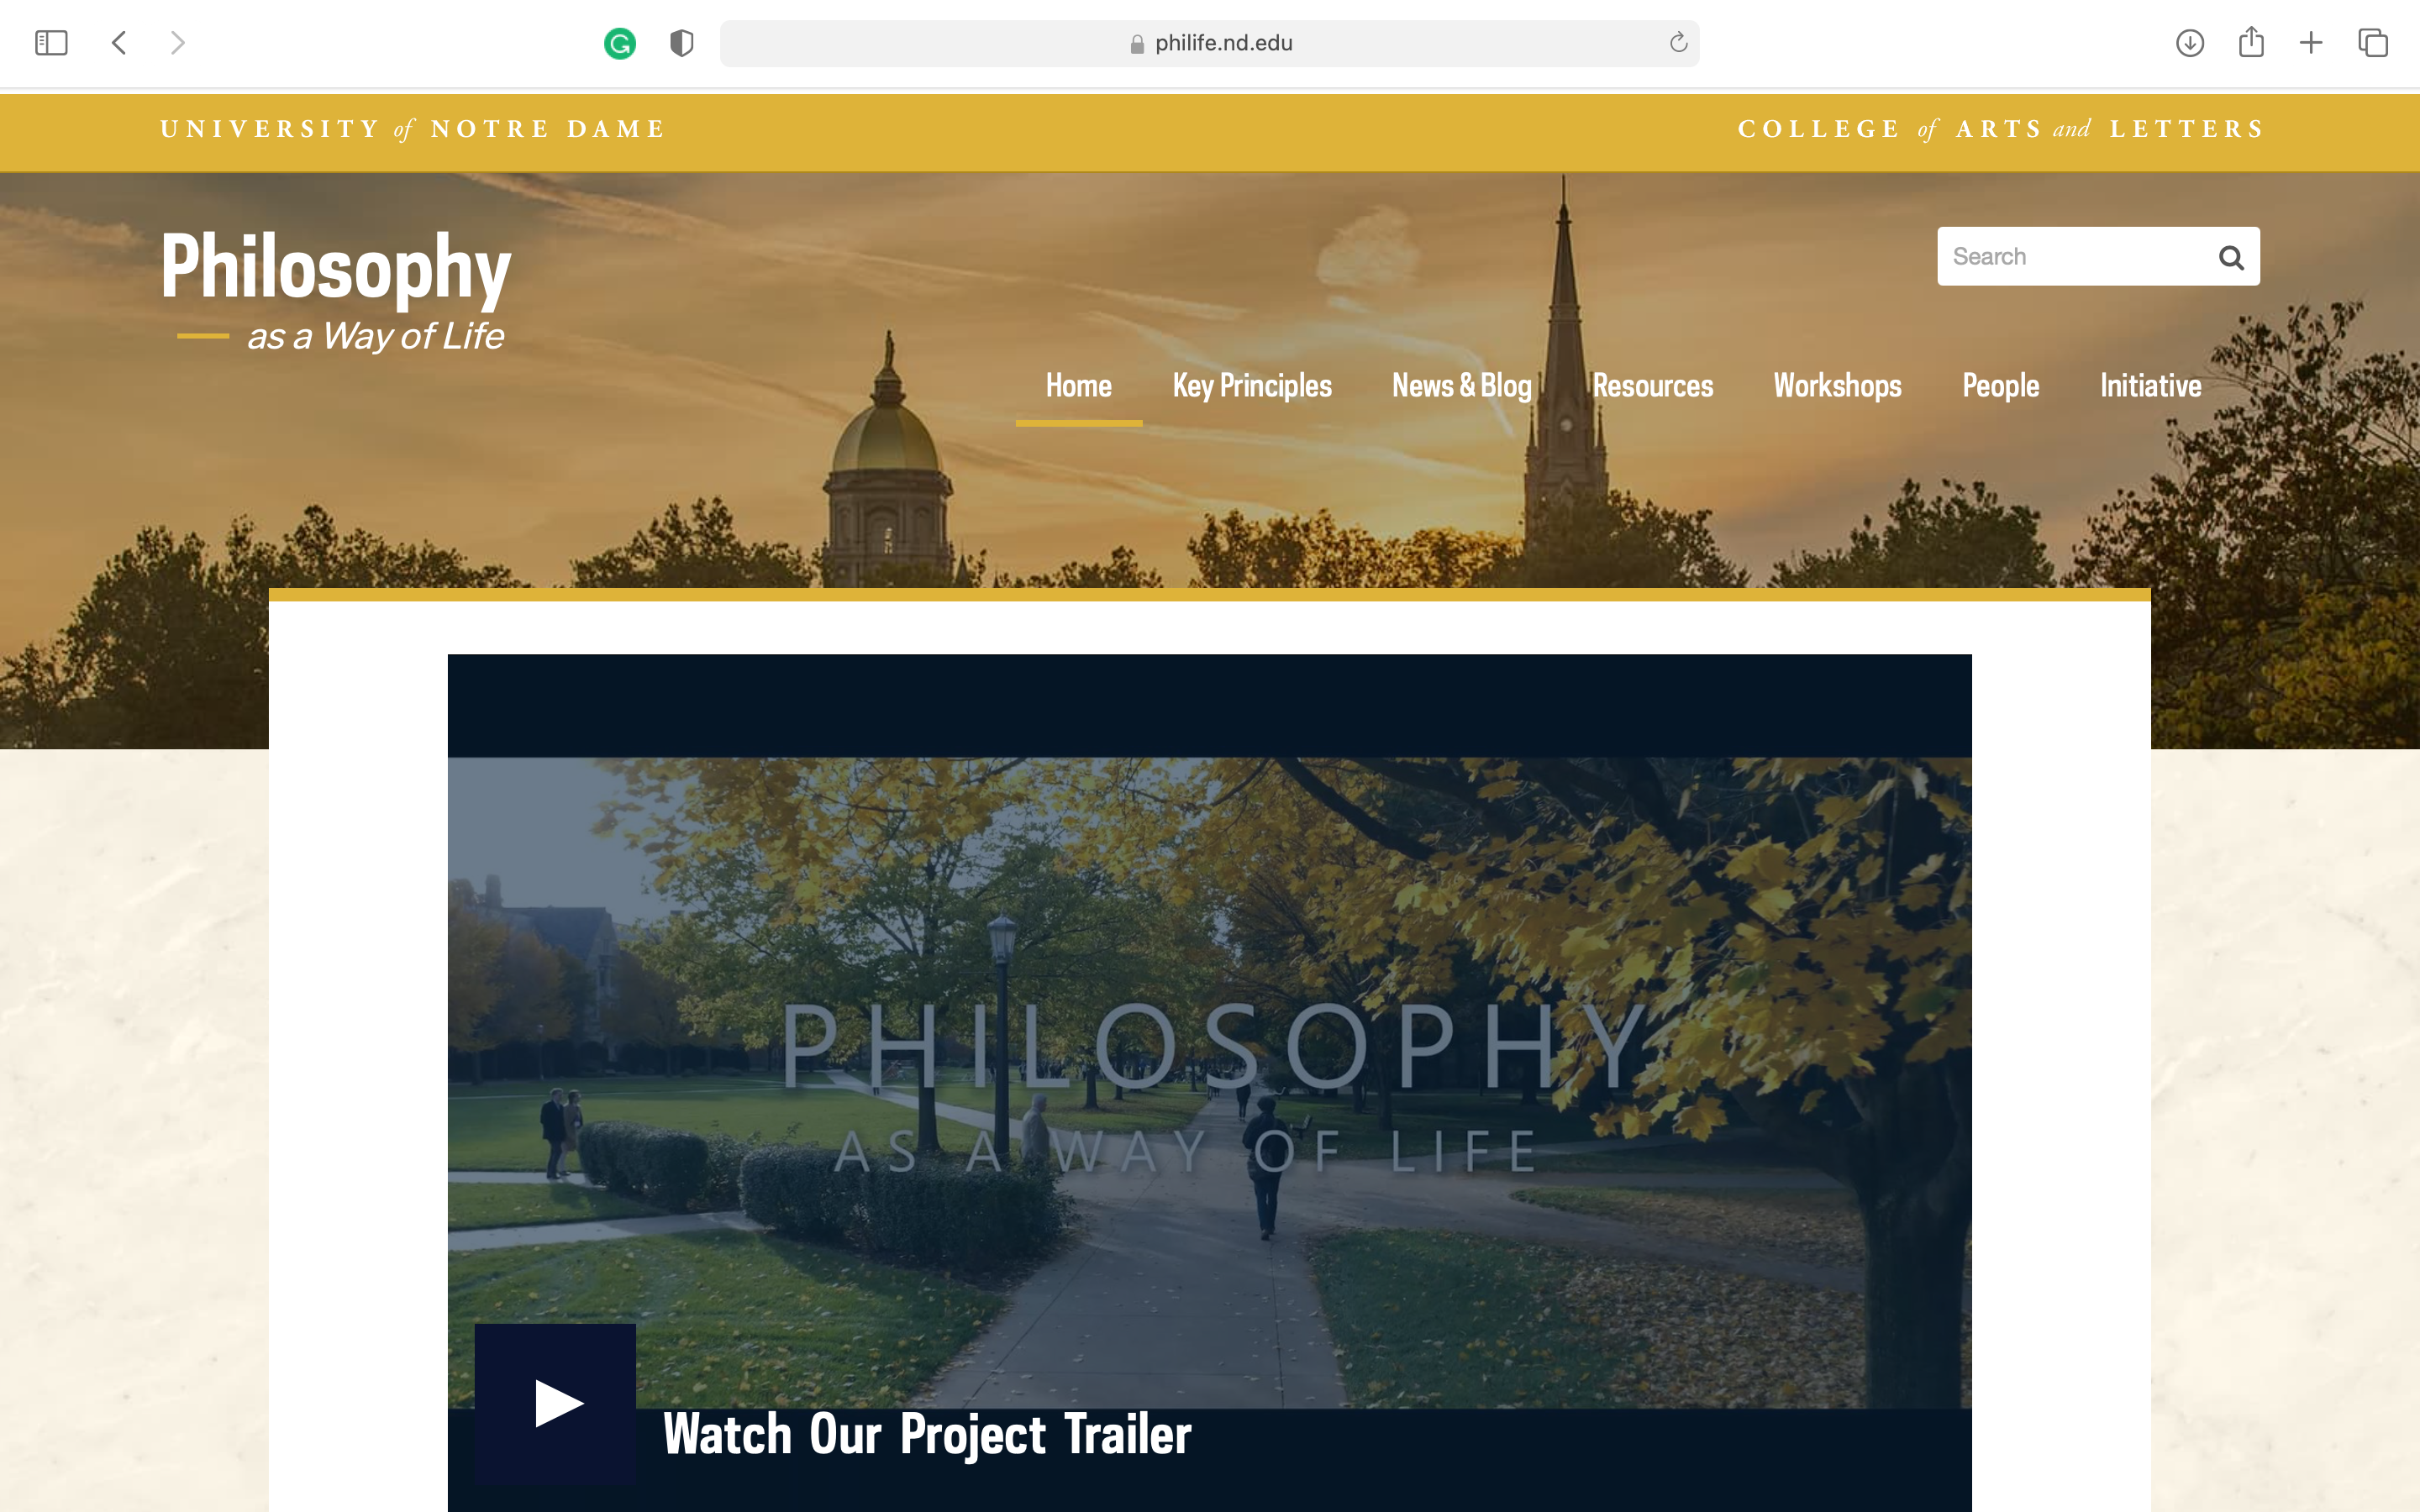 Leach, Stehn, Butler, and Warfield win Mellon Foundation grant from the University of Notre Dame to redesign philosophy course